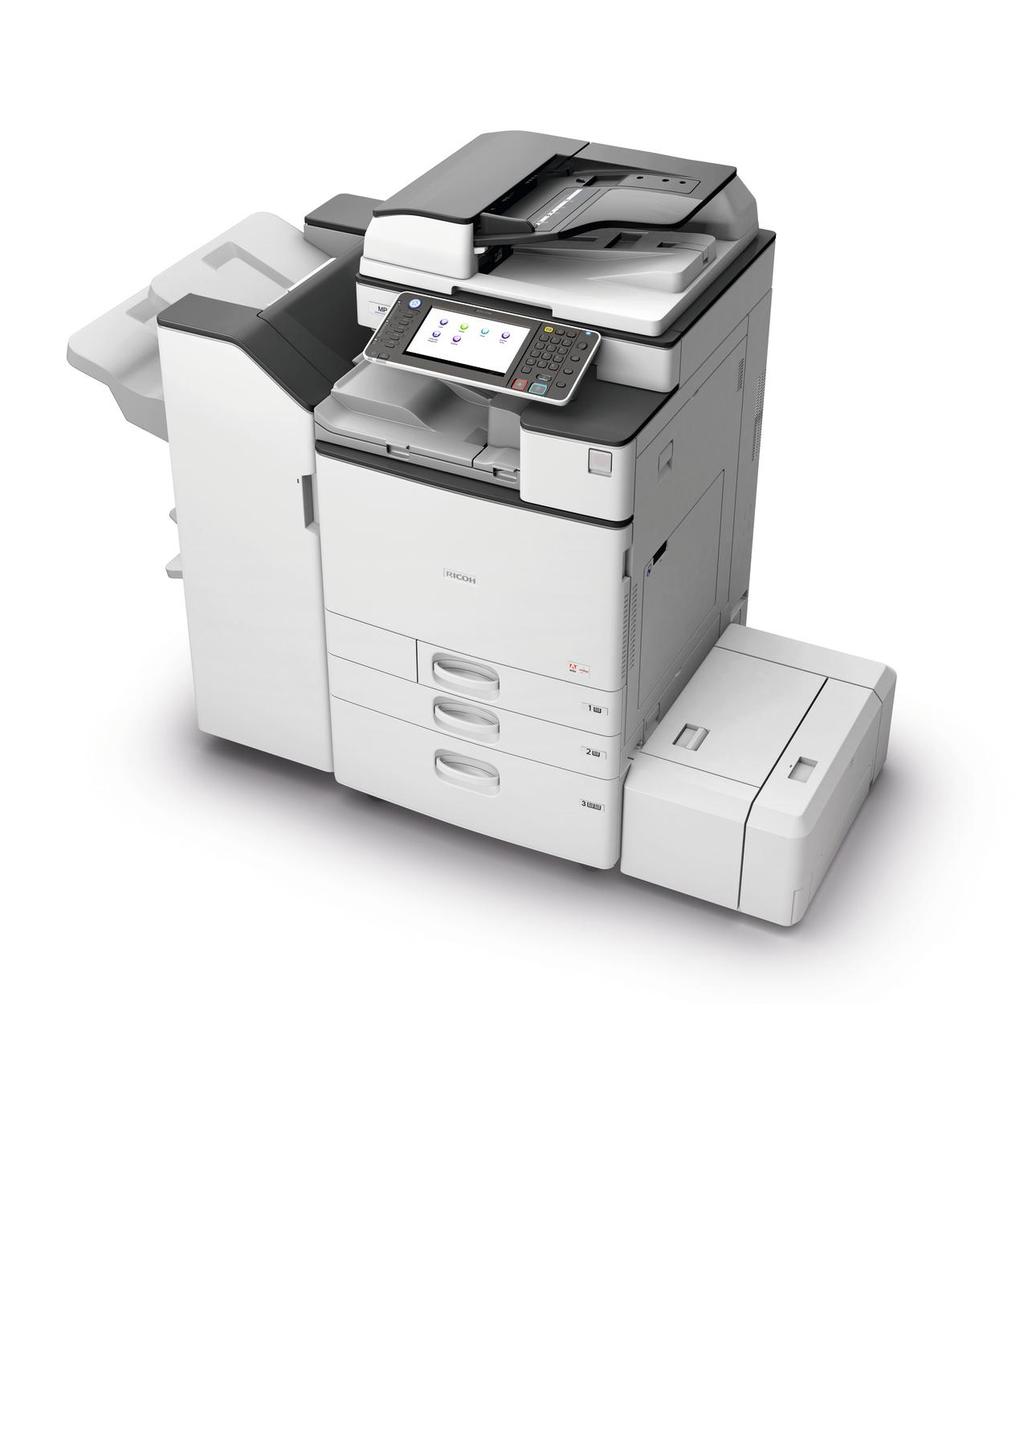 Professional quality printing Superb text and image reproduction make these devices ideal for everyday document needs as well as for more complex print jobs.